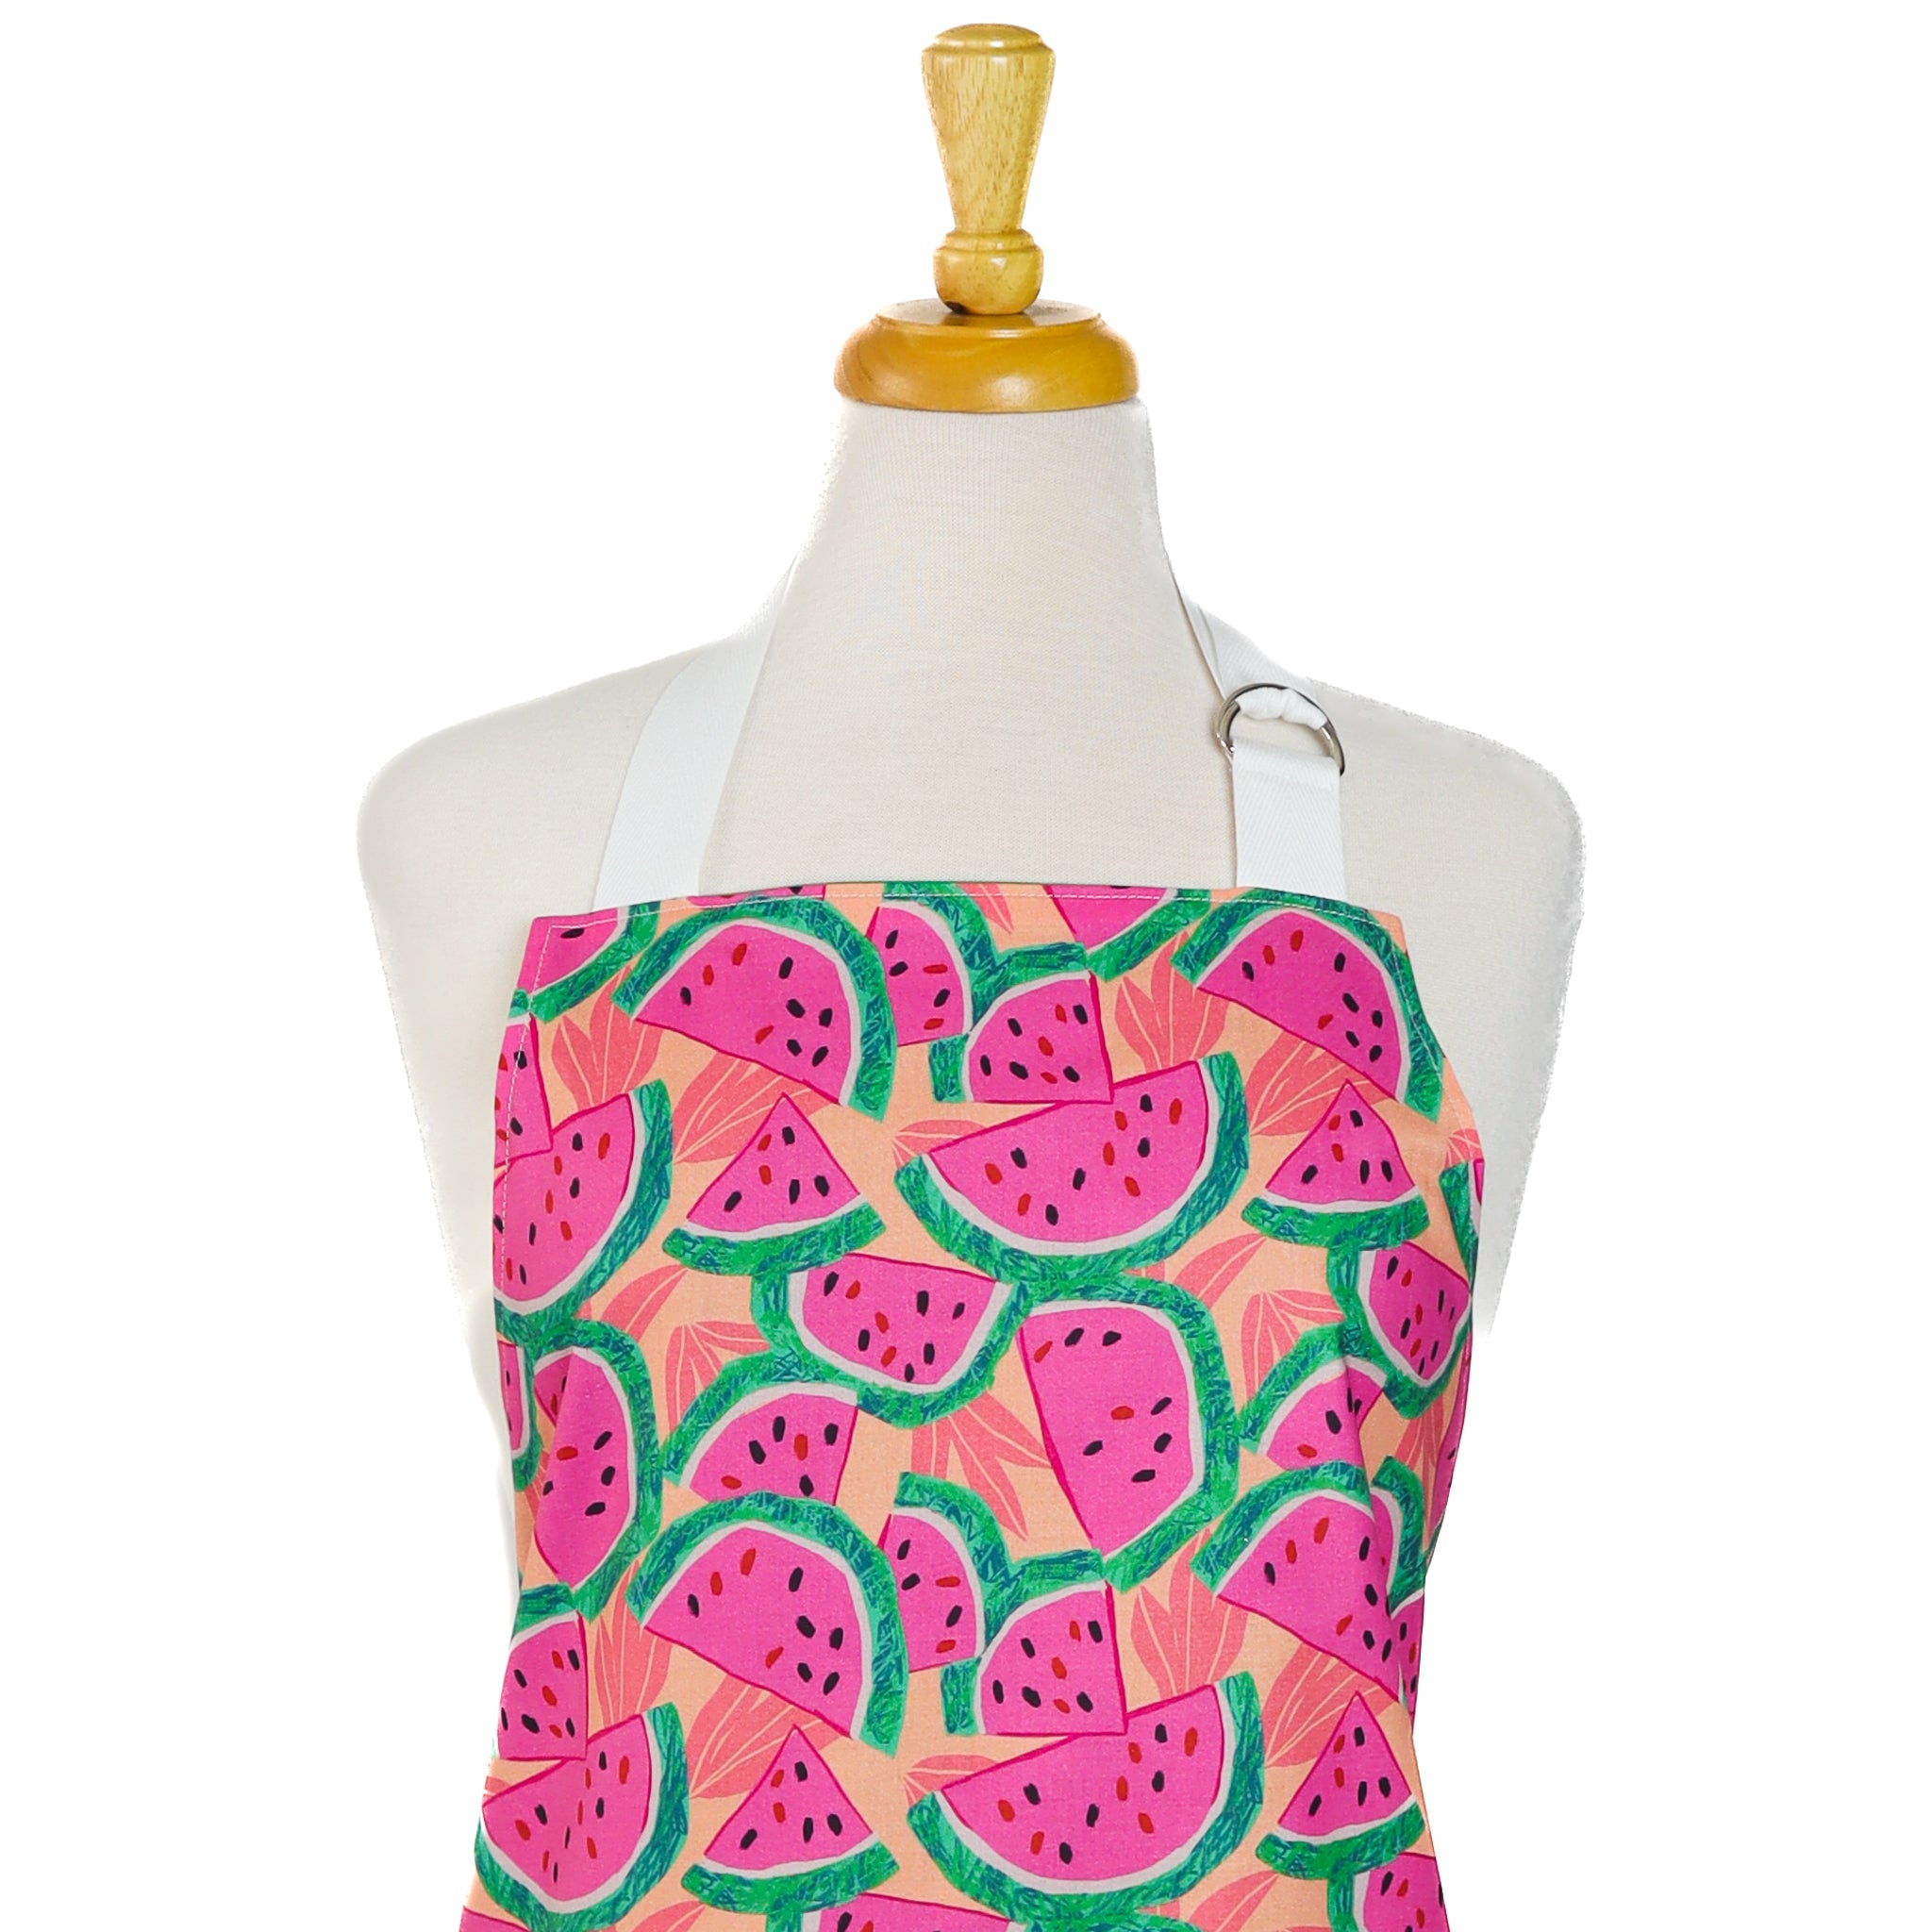 Apron Sewing Kit - Watermelons